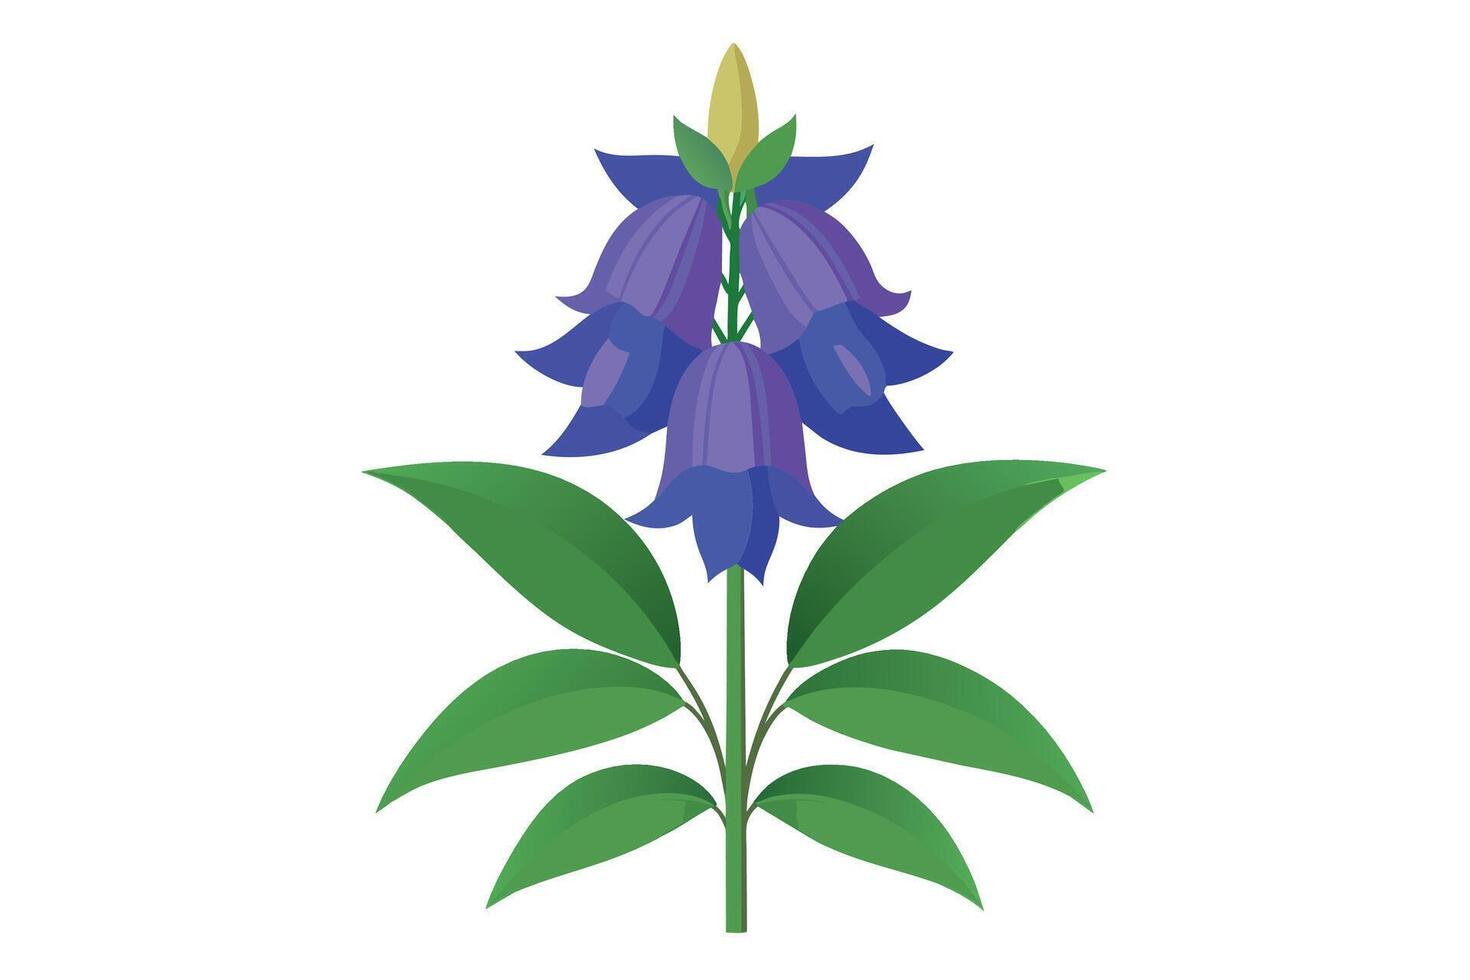 Monkshood Flower Vector Illustration Isolated on a Clean Background